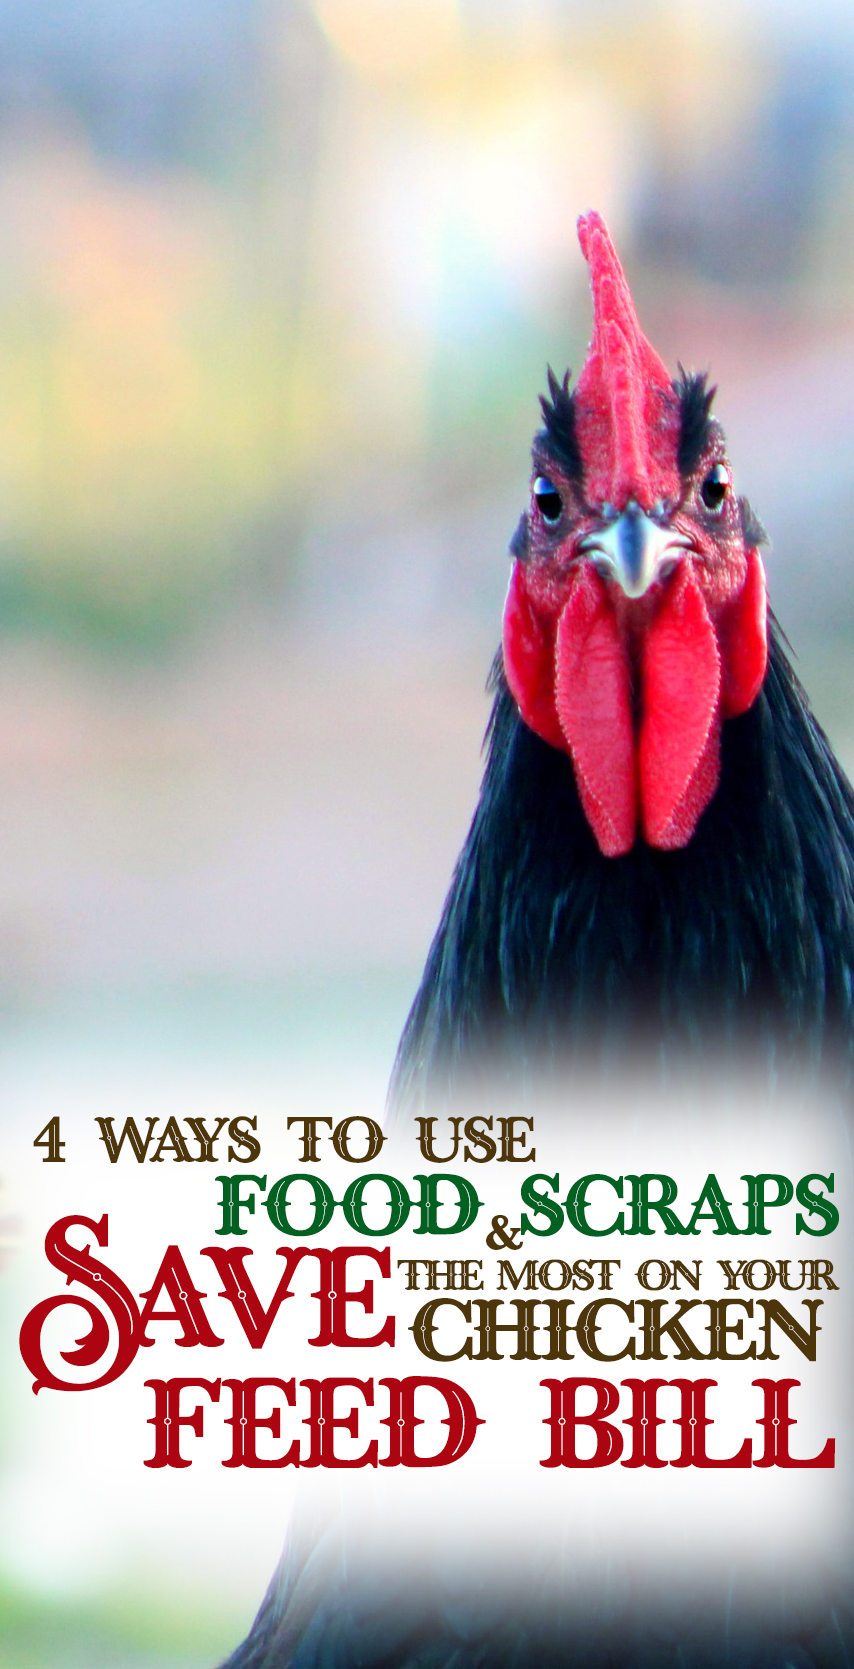 Learn how you can save more money on your chickens’ feed bill by feeding them your food scraps. Beyond the basic & holistic ways you can use your kitchen scraps. For those who like sustainable & DIY.